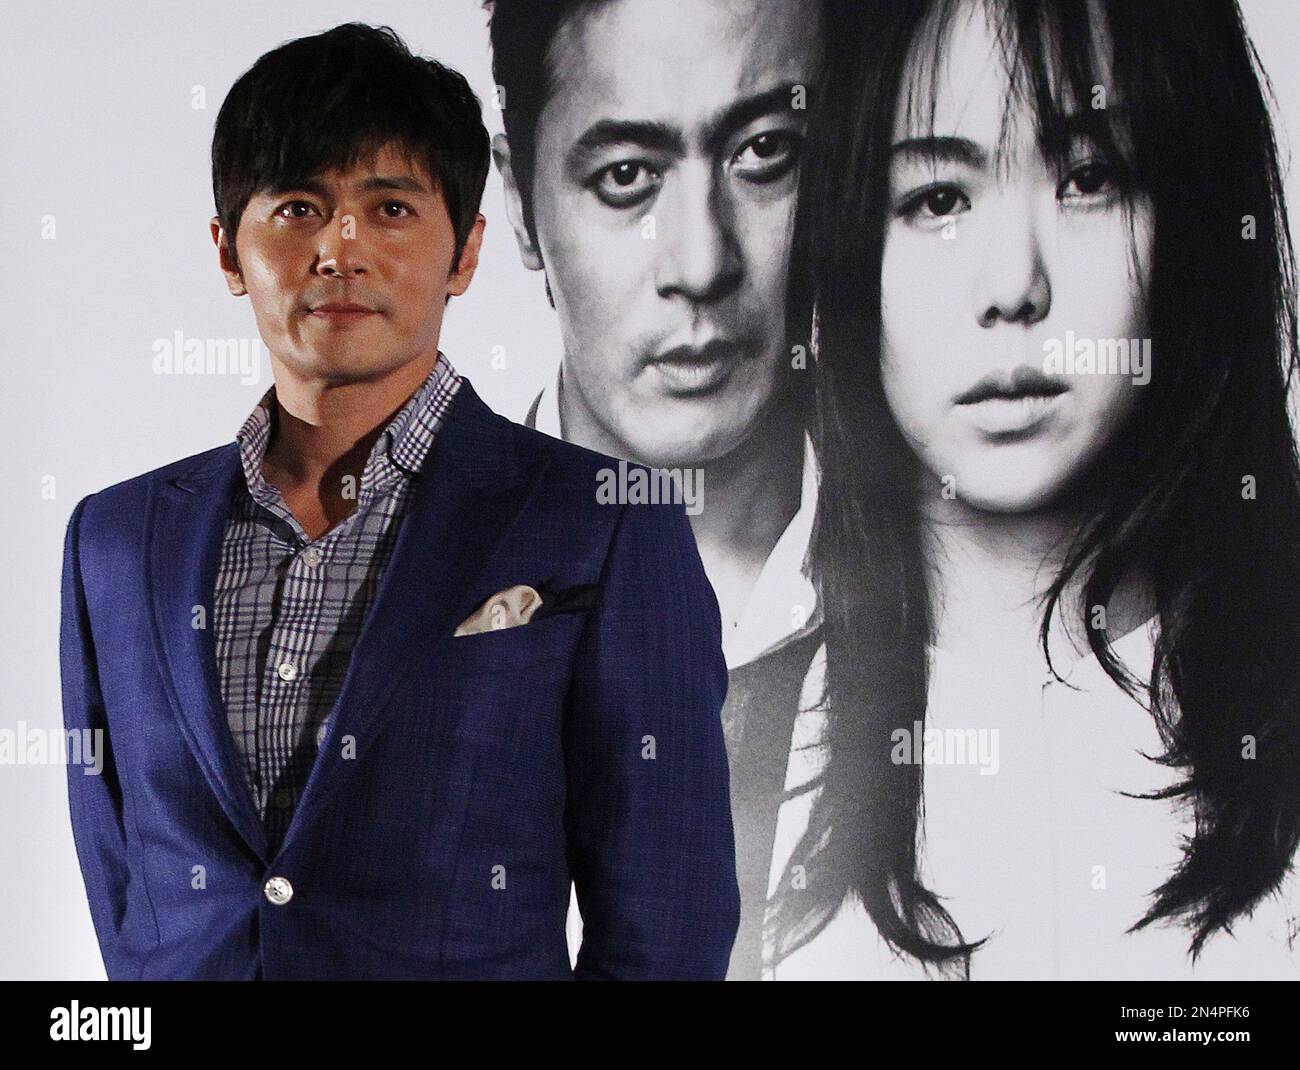 South Korean actor Jang Dong-gun poses during a press conference to promote his latest movie "No Tears for the Dead" in Seoul, South Korea, Friday, May 30, 2014. (AP Photo/Ahn Young-joon) Stock Photo